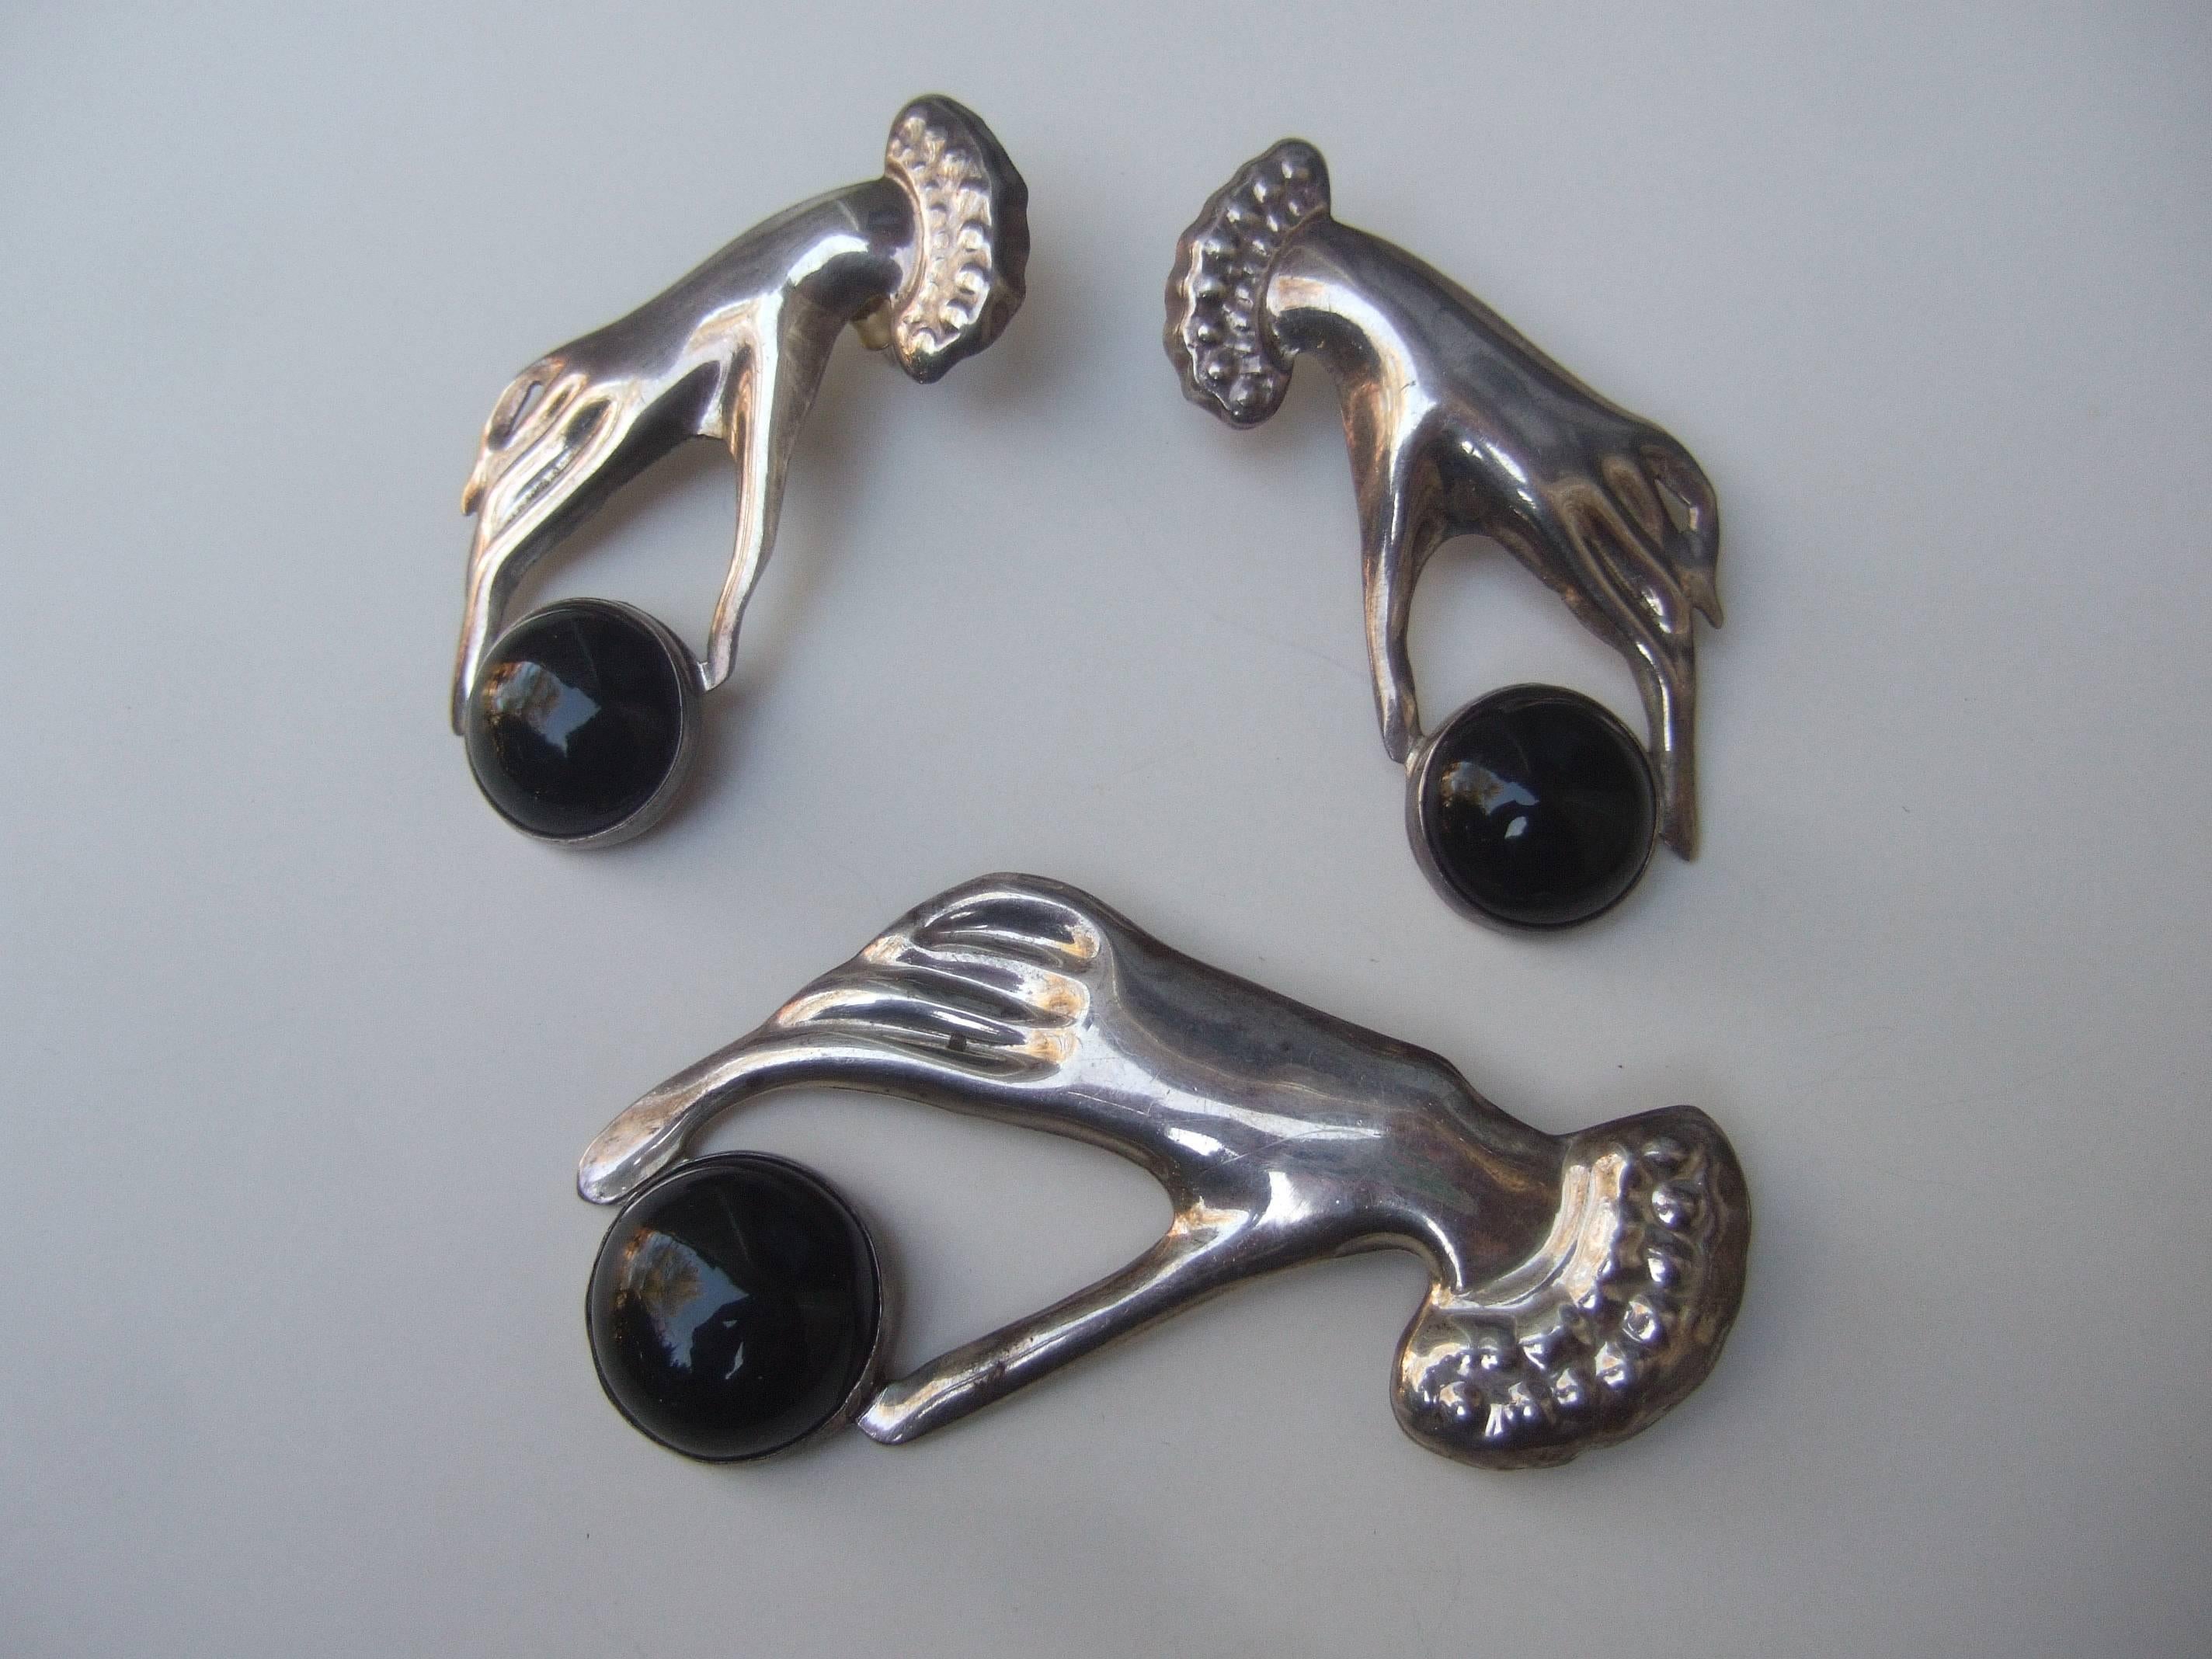 Mexican sterling figural hand brooch & earring set 
The unique large scale brooch & matching 
pierced earrings are adorned with a large
black glass cabochon 

The stylized artisan brooch & earring set
makes a very dramatic accessory 

The